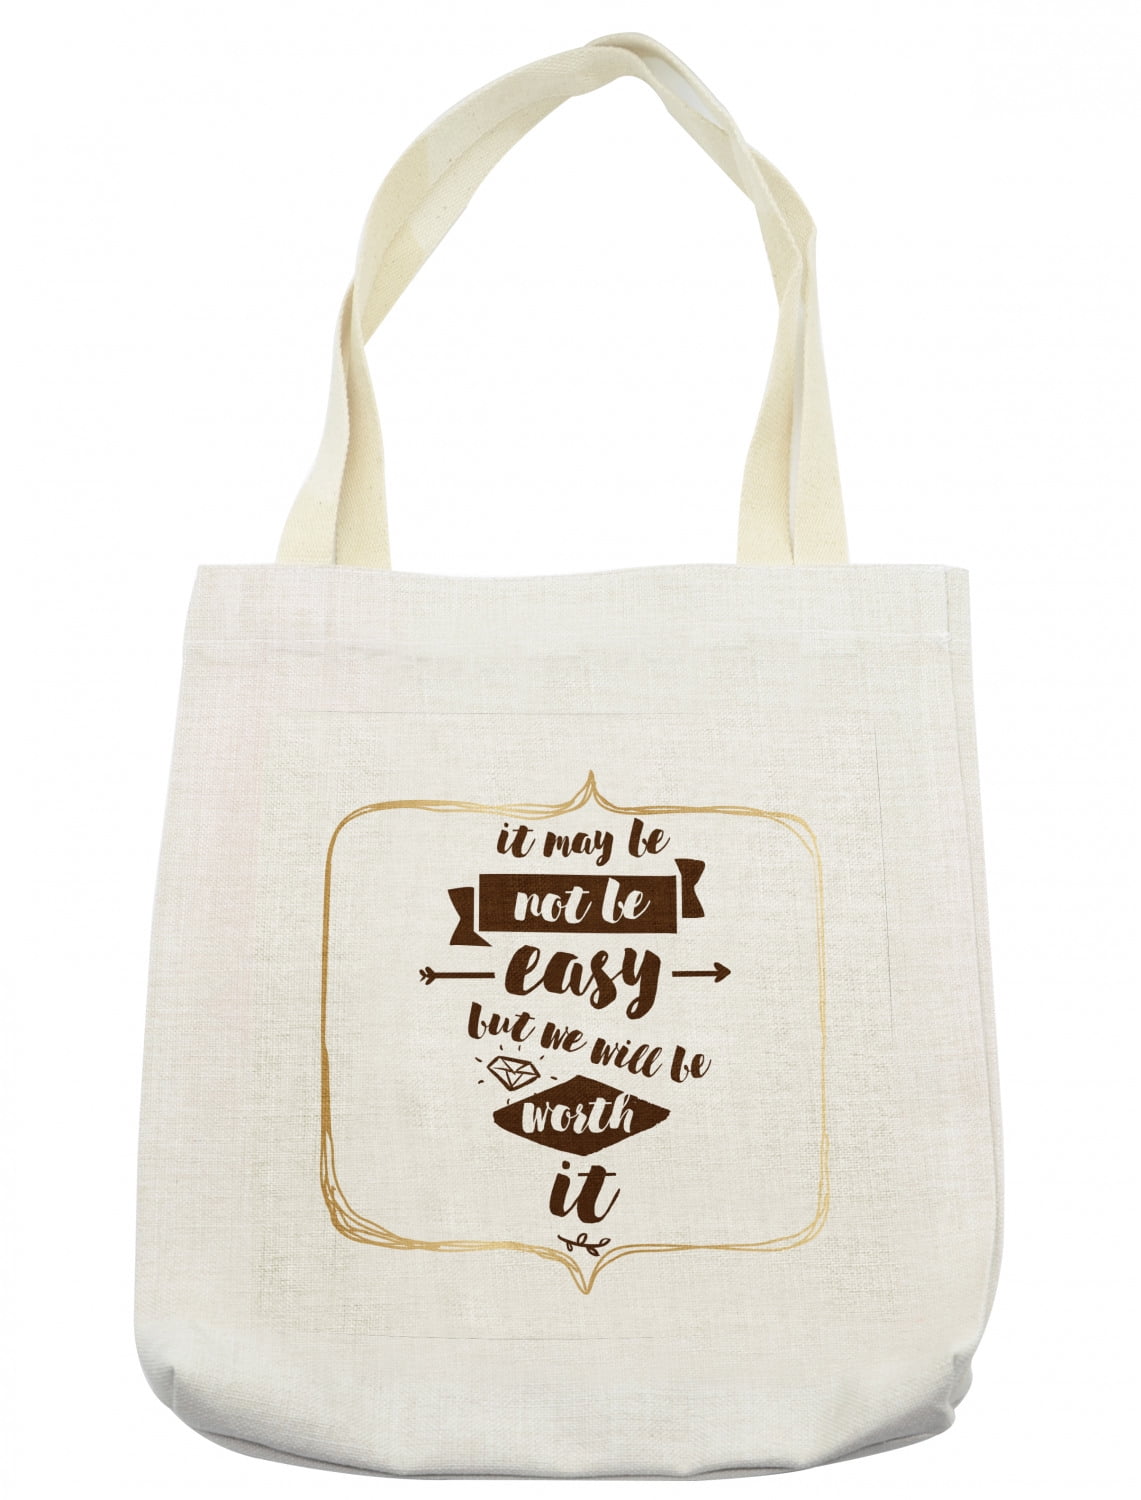 Saying Tote Bag, Wedding Proposal Inspired Sentence with Hand Lettering ...